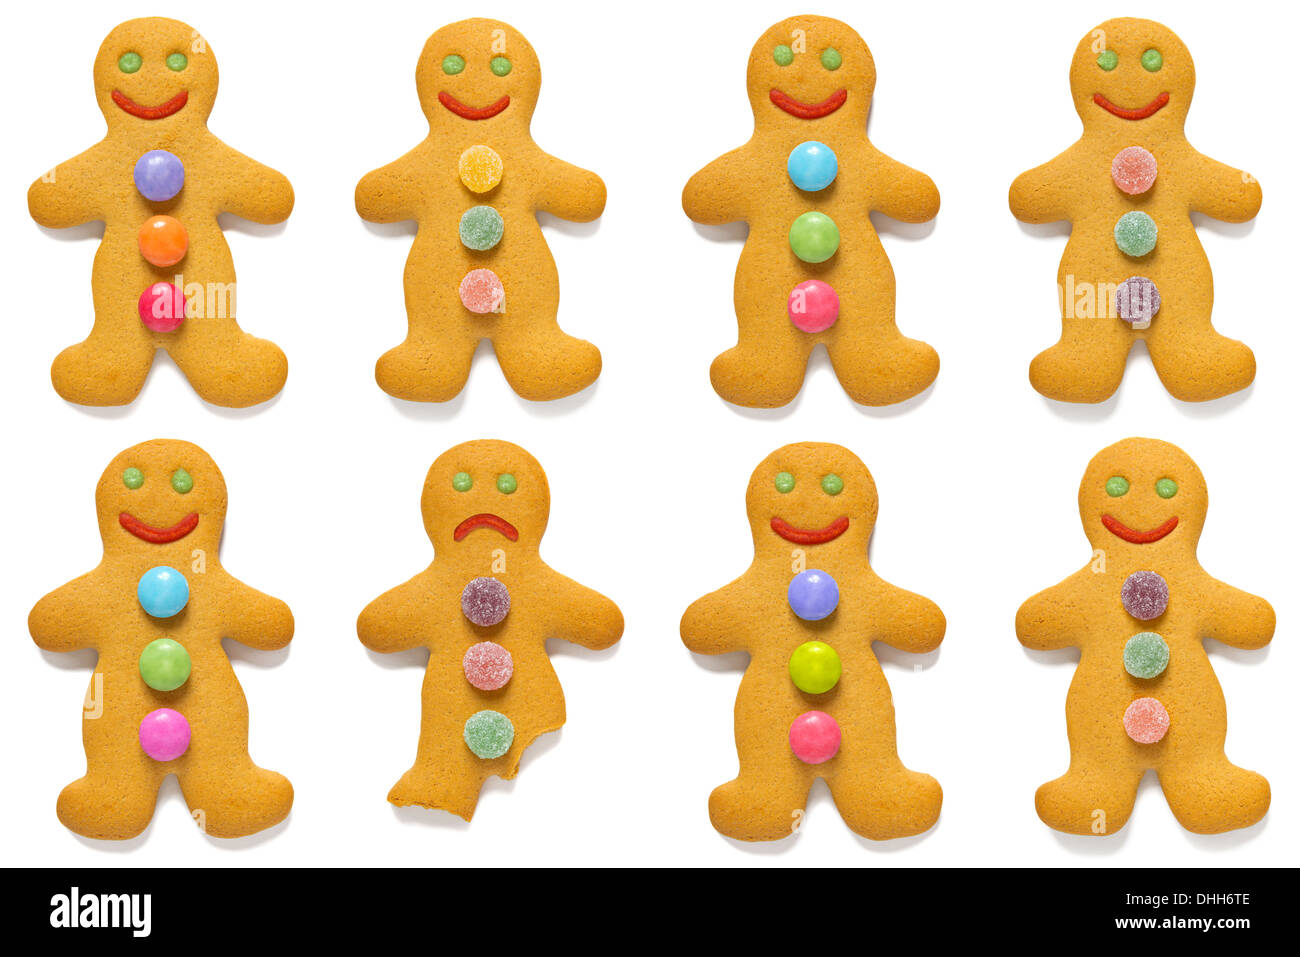 Smiling gingerbread men with one exception, isolated on a white background. Stock Photo